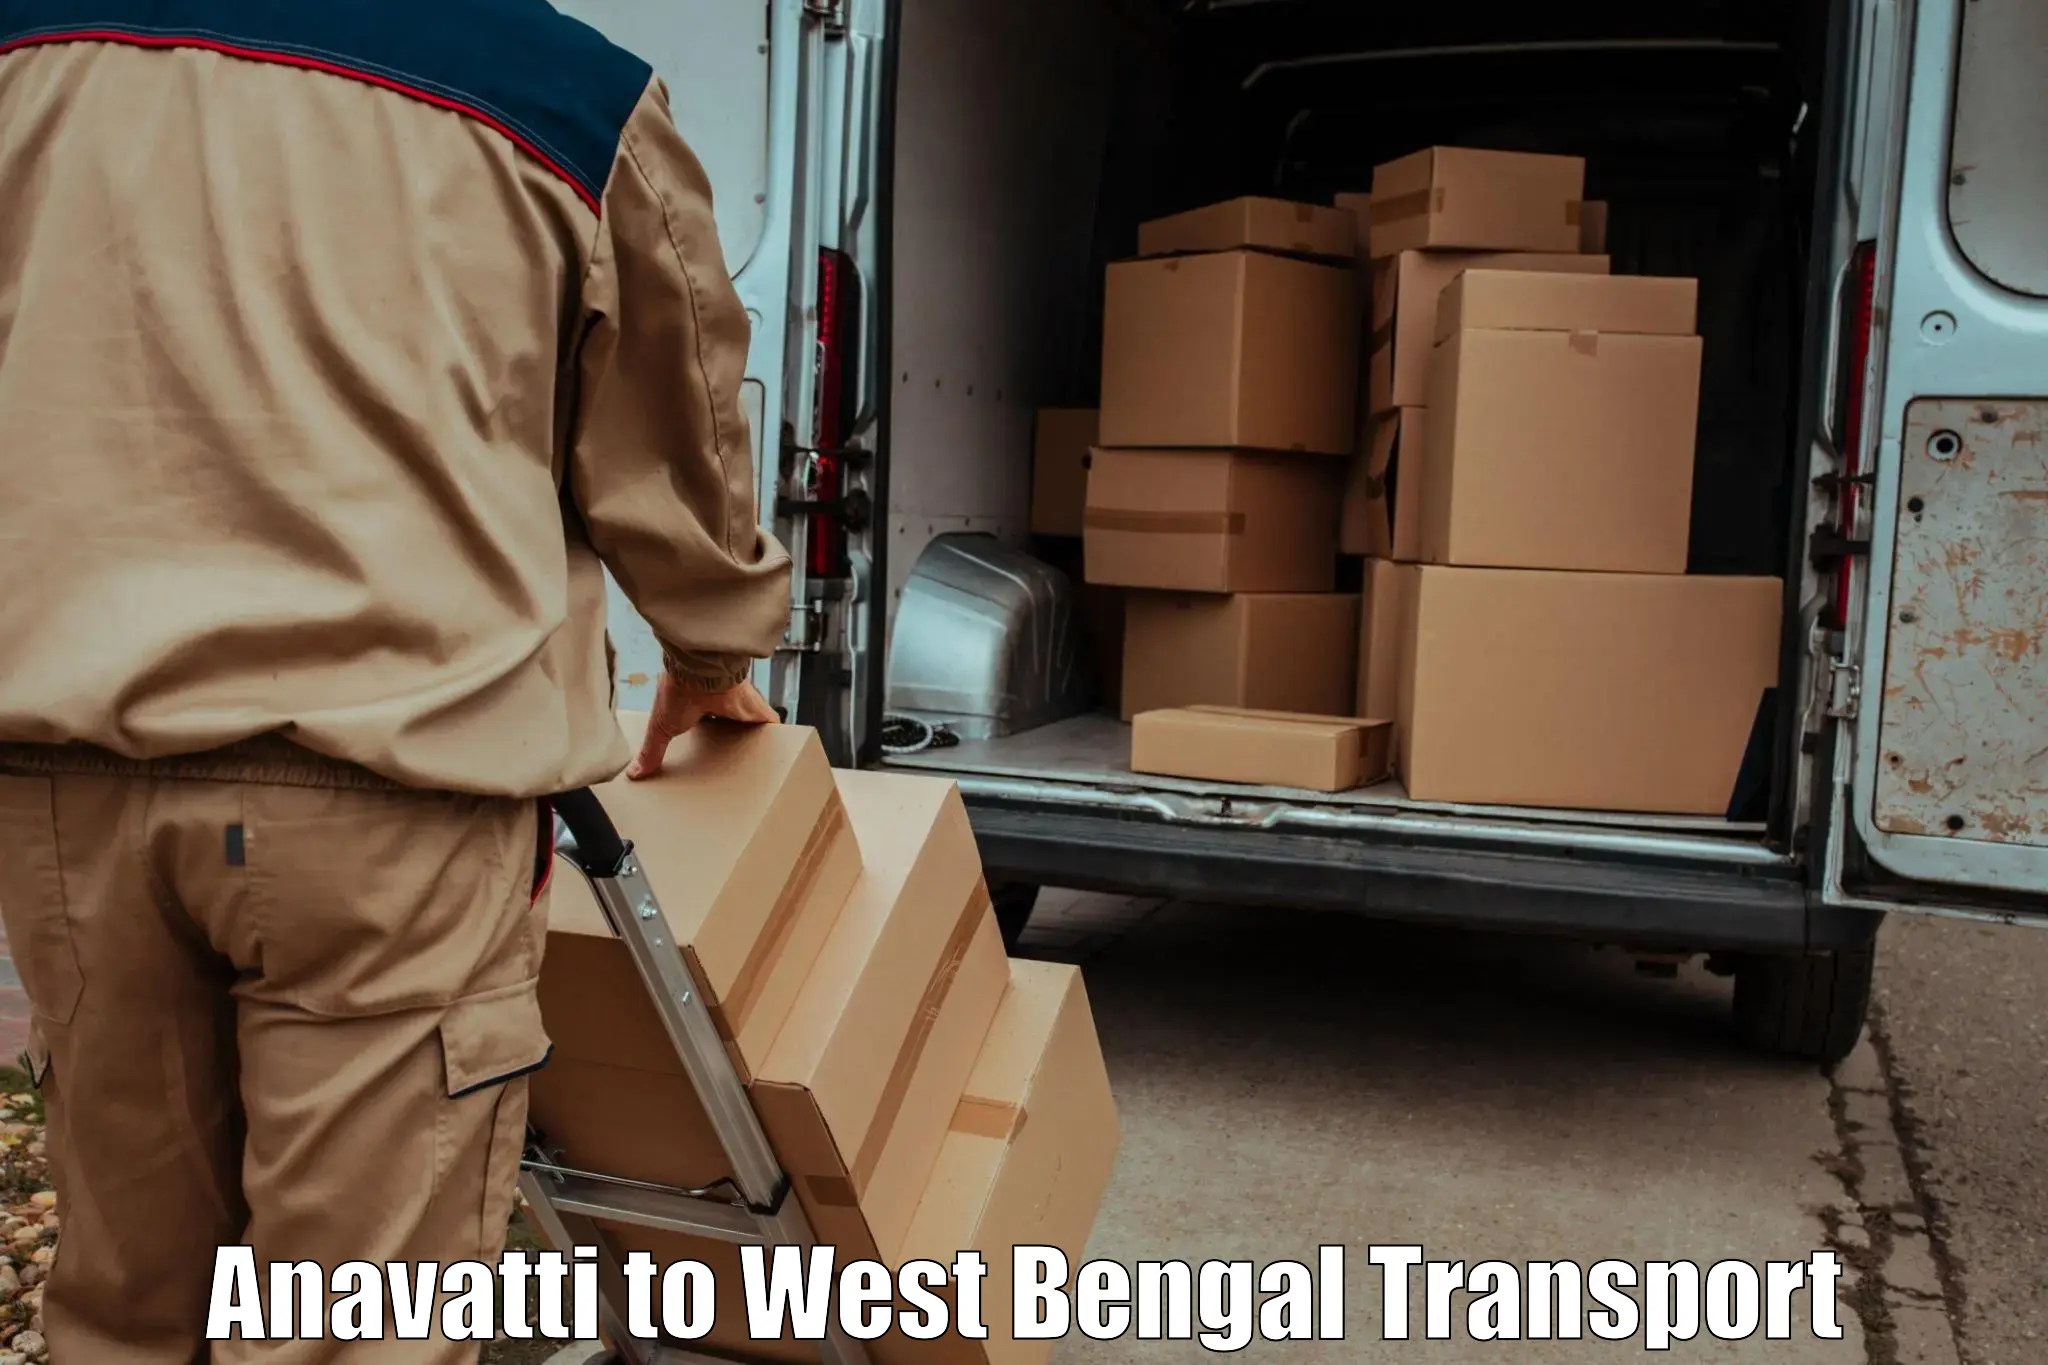 Delivery service Anavatti to West Bengal